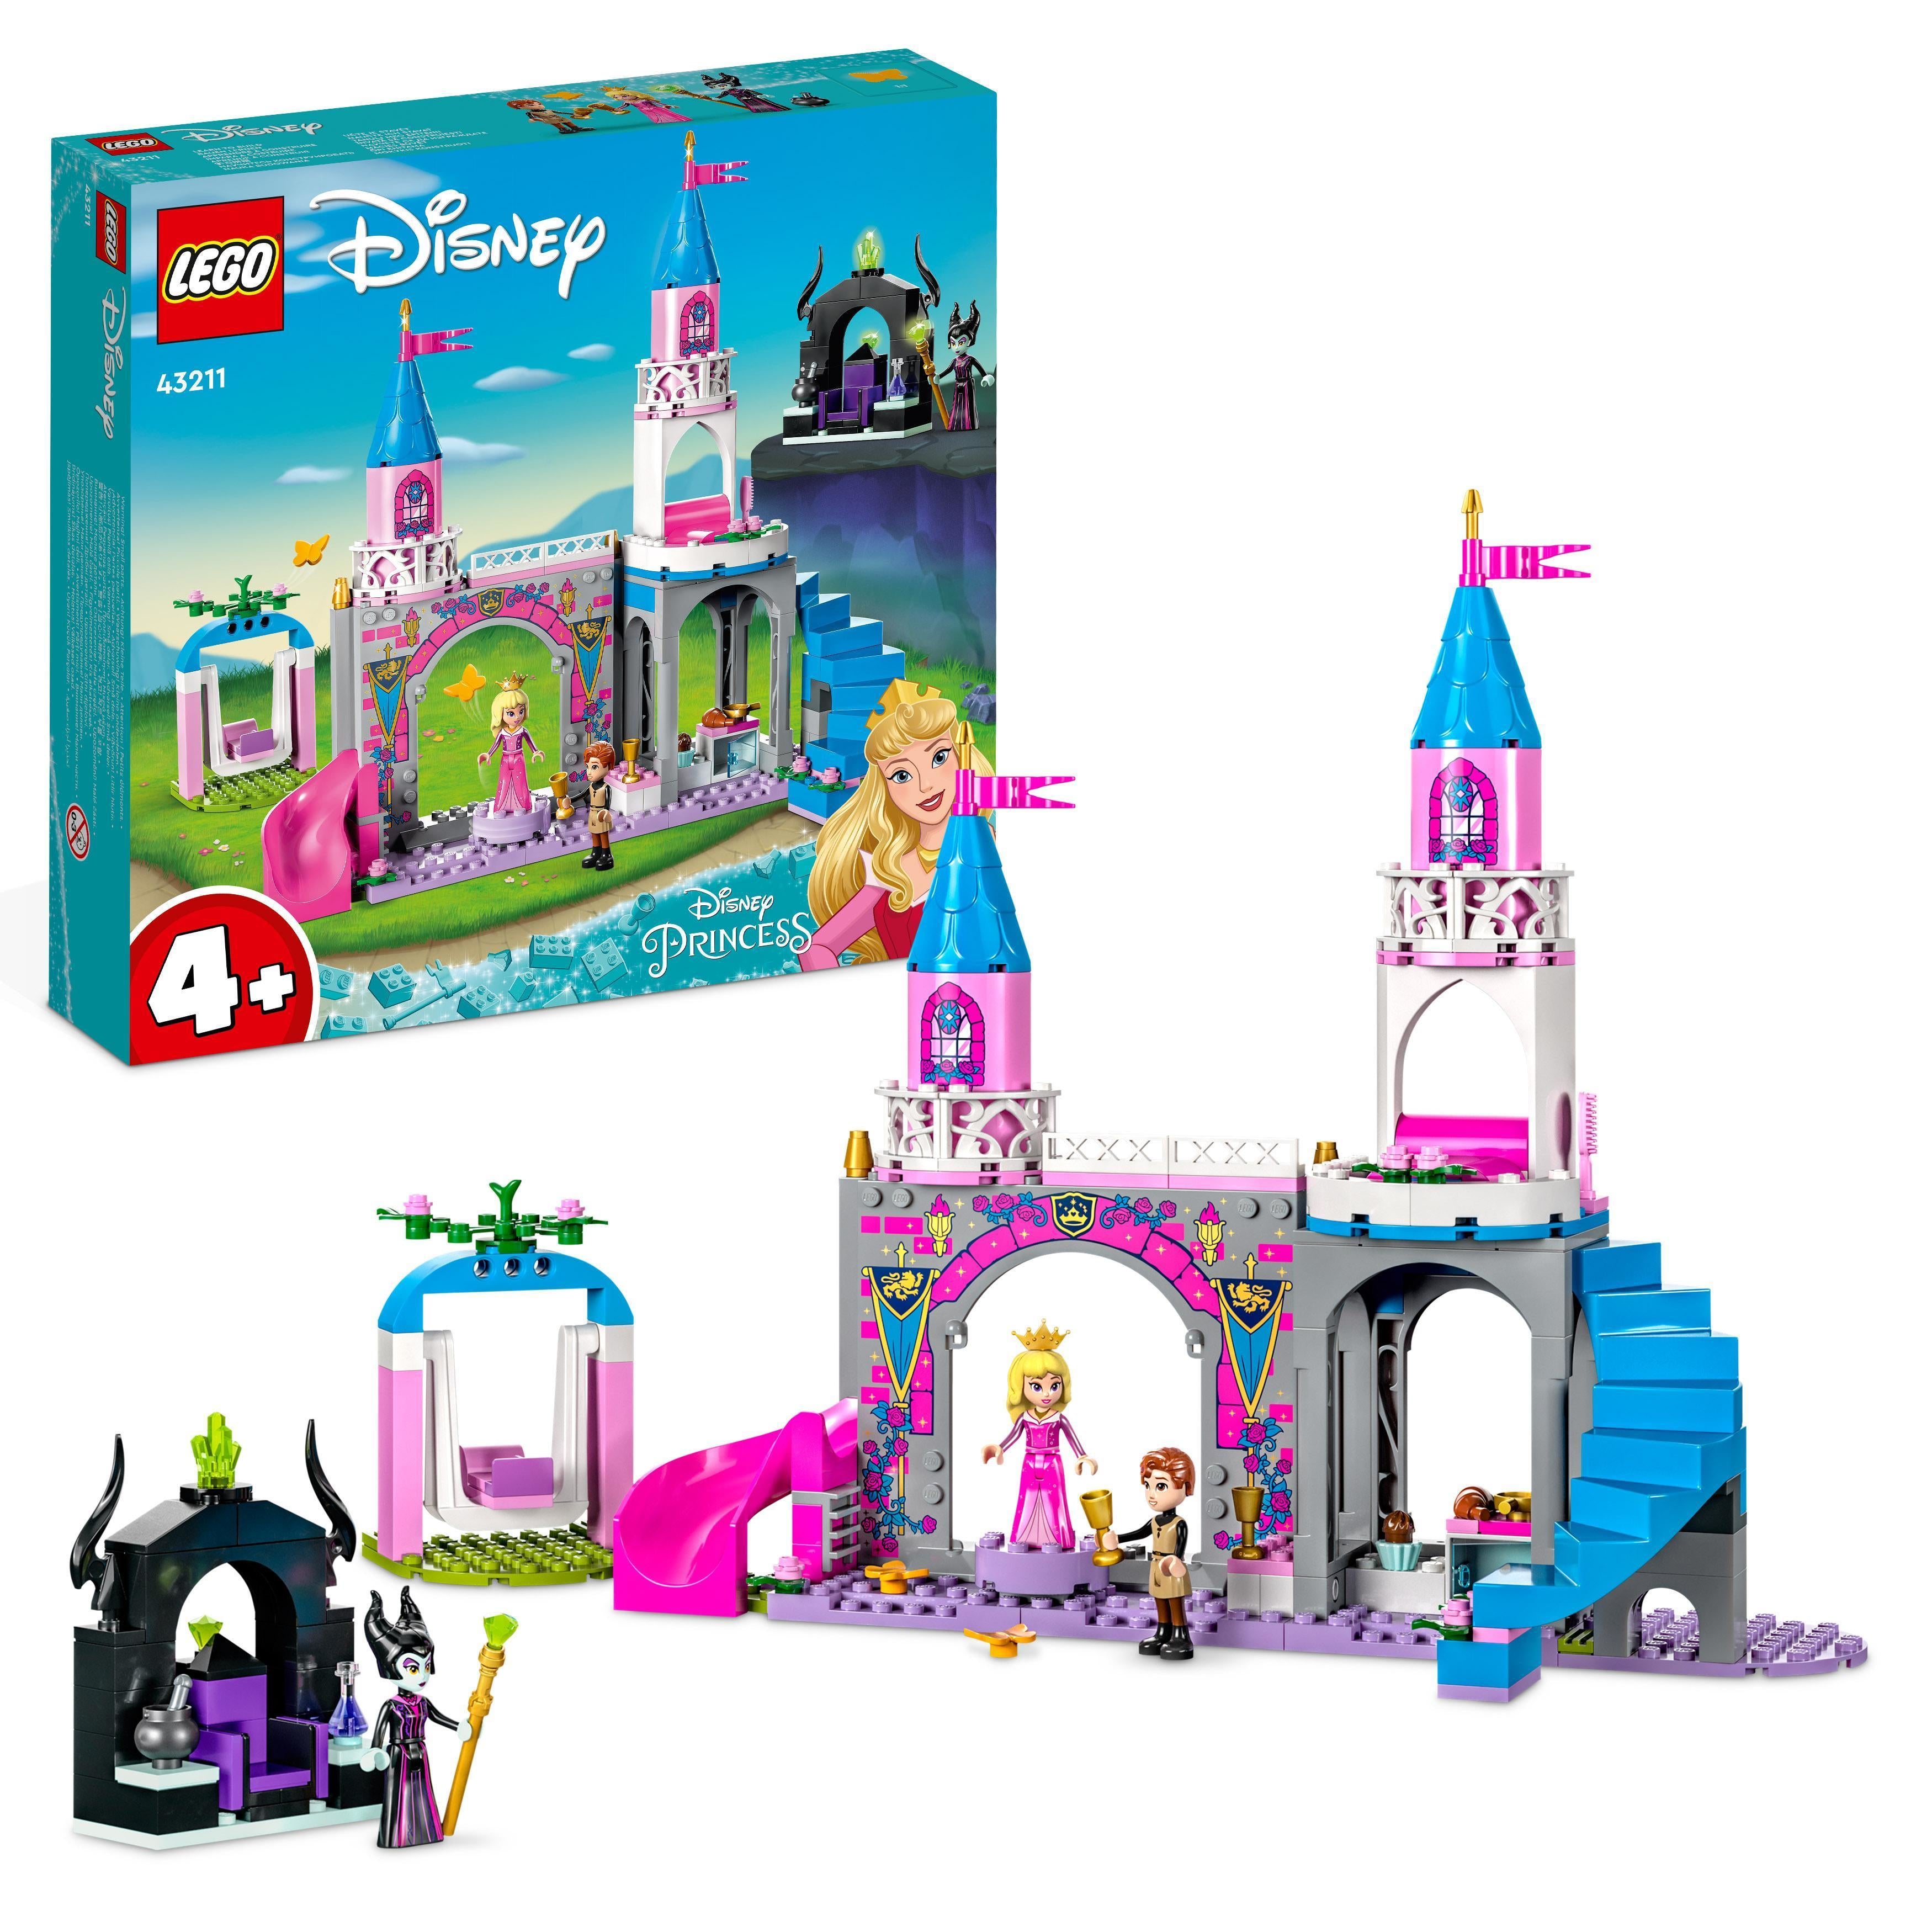 LEGO 43211 Disney Princess Aurora's Castle, Builable Toy Playset with Sleeping Beauty, Prince Philip and Maleficent Mini-Doll Figures, Toys for Girls and Boys Aged 4